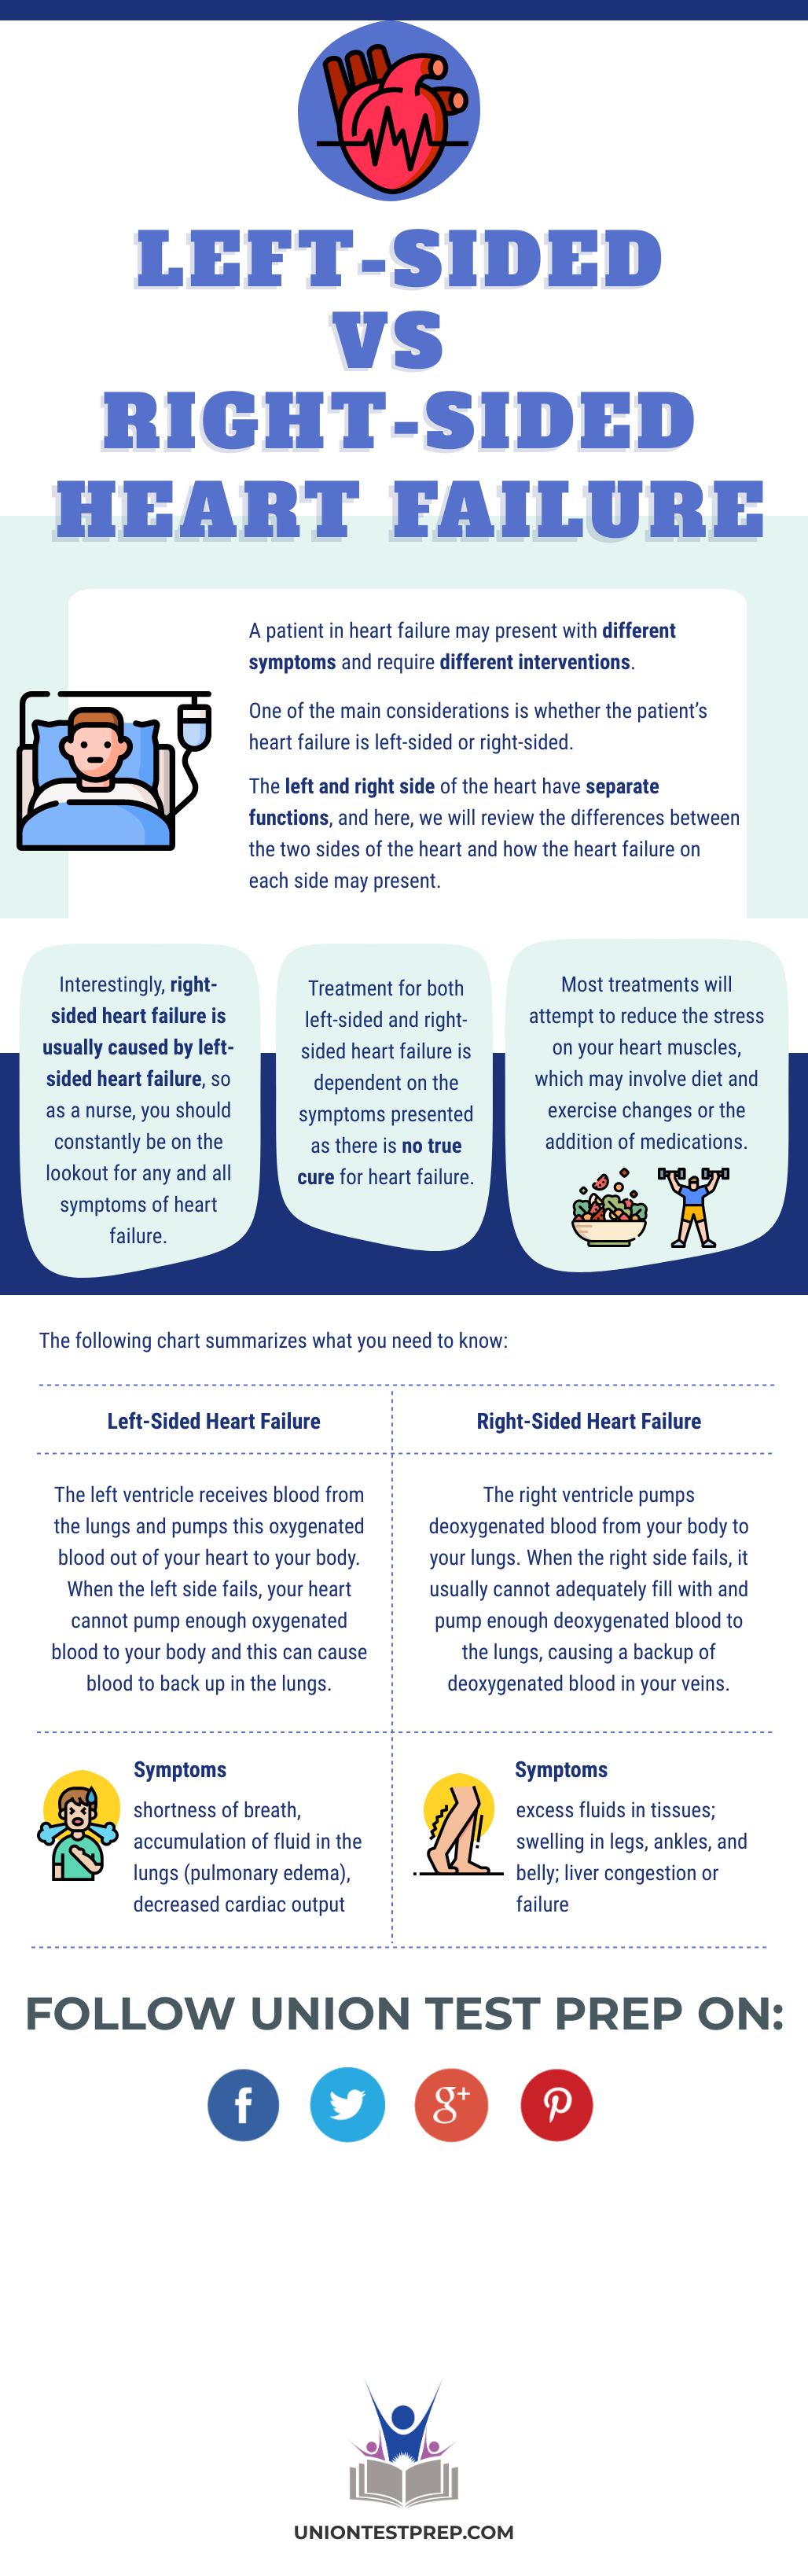 Difference Between Left Sided and Right Sided Heart Failure